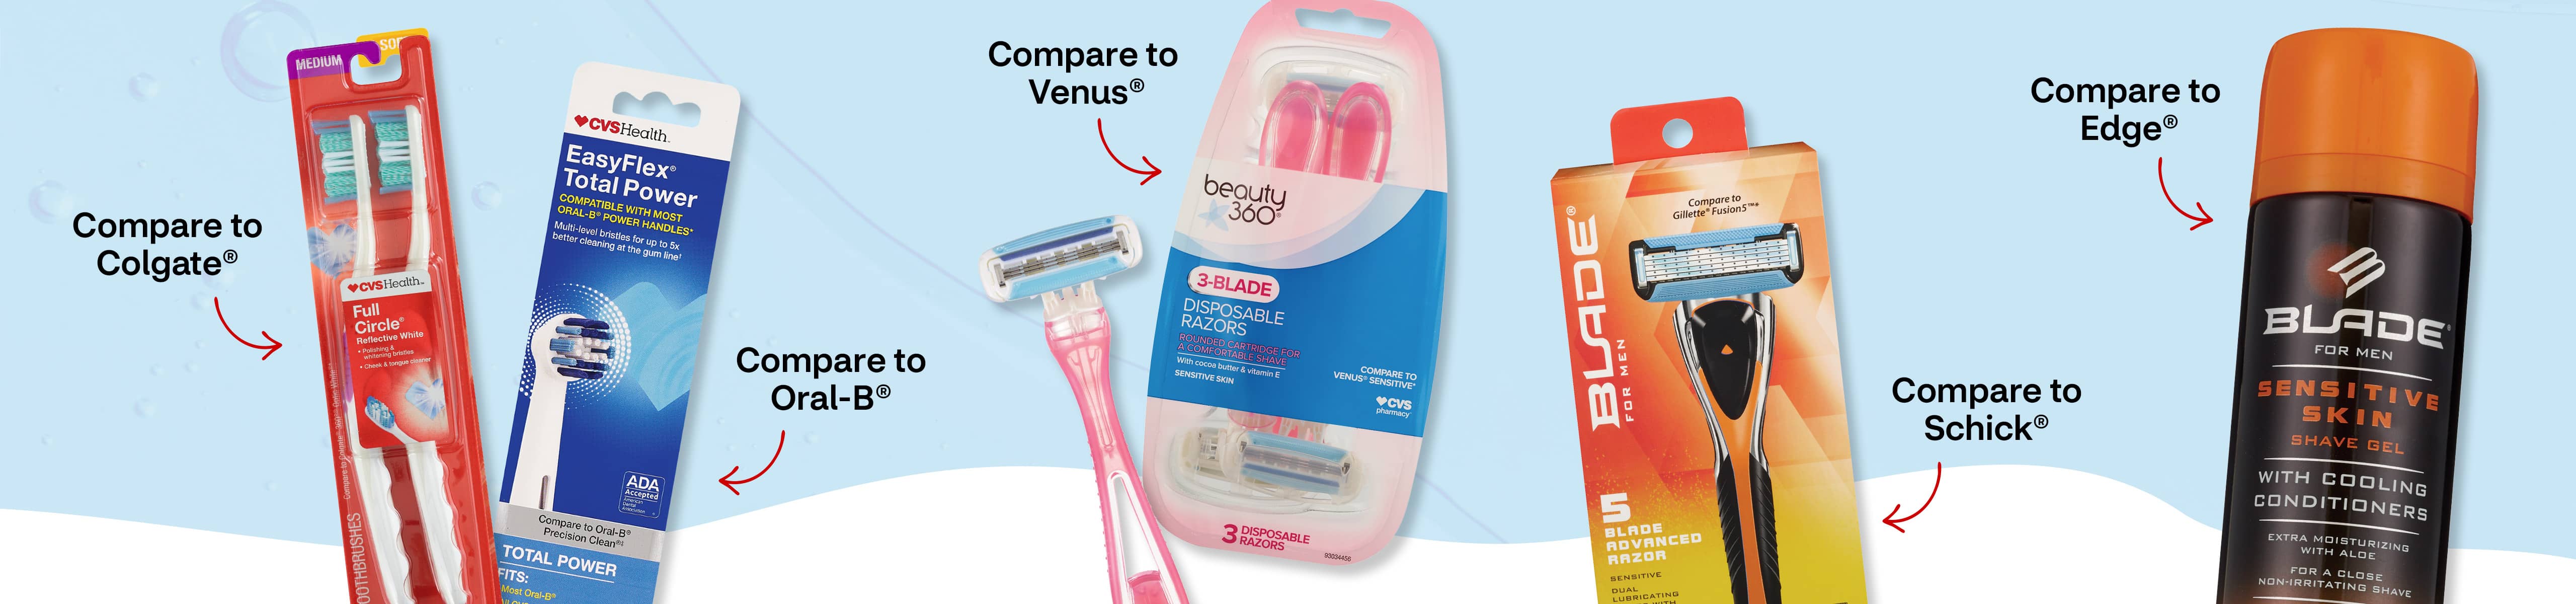 Compare Colgate to CVS Health toothbrushes, Oral-B to CVS Health power toothbrush, Venus to CVS Health razors, Schick to Blade razor, and Edge to Blade shaving gel